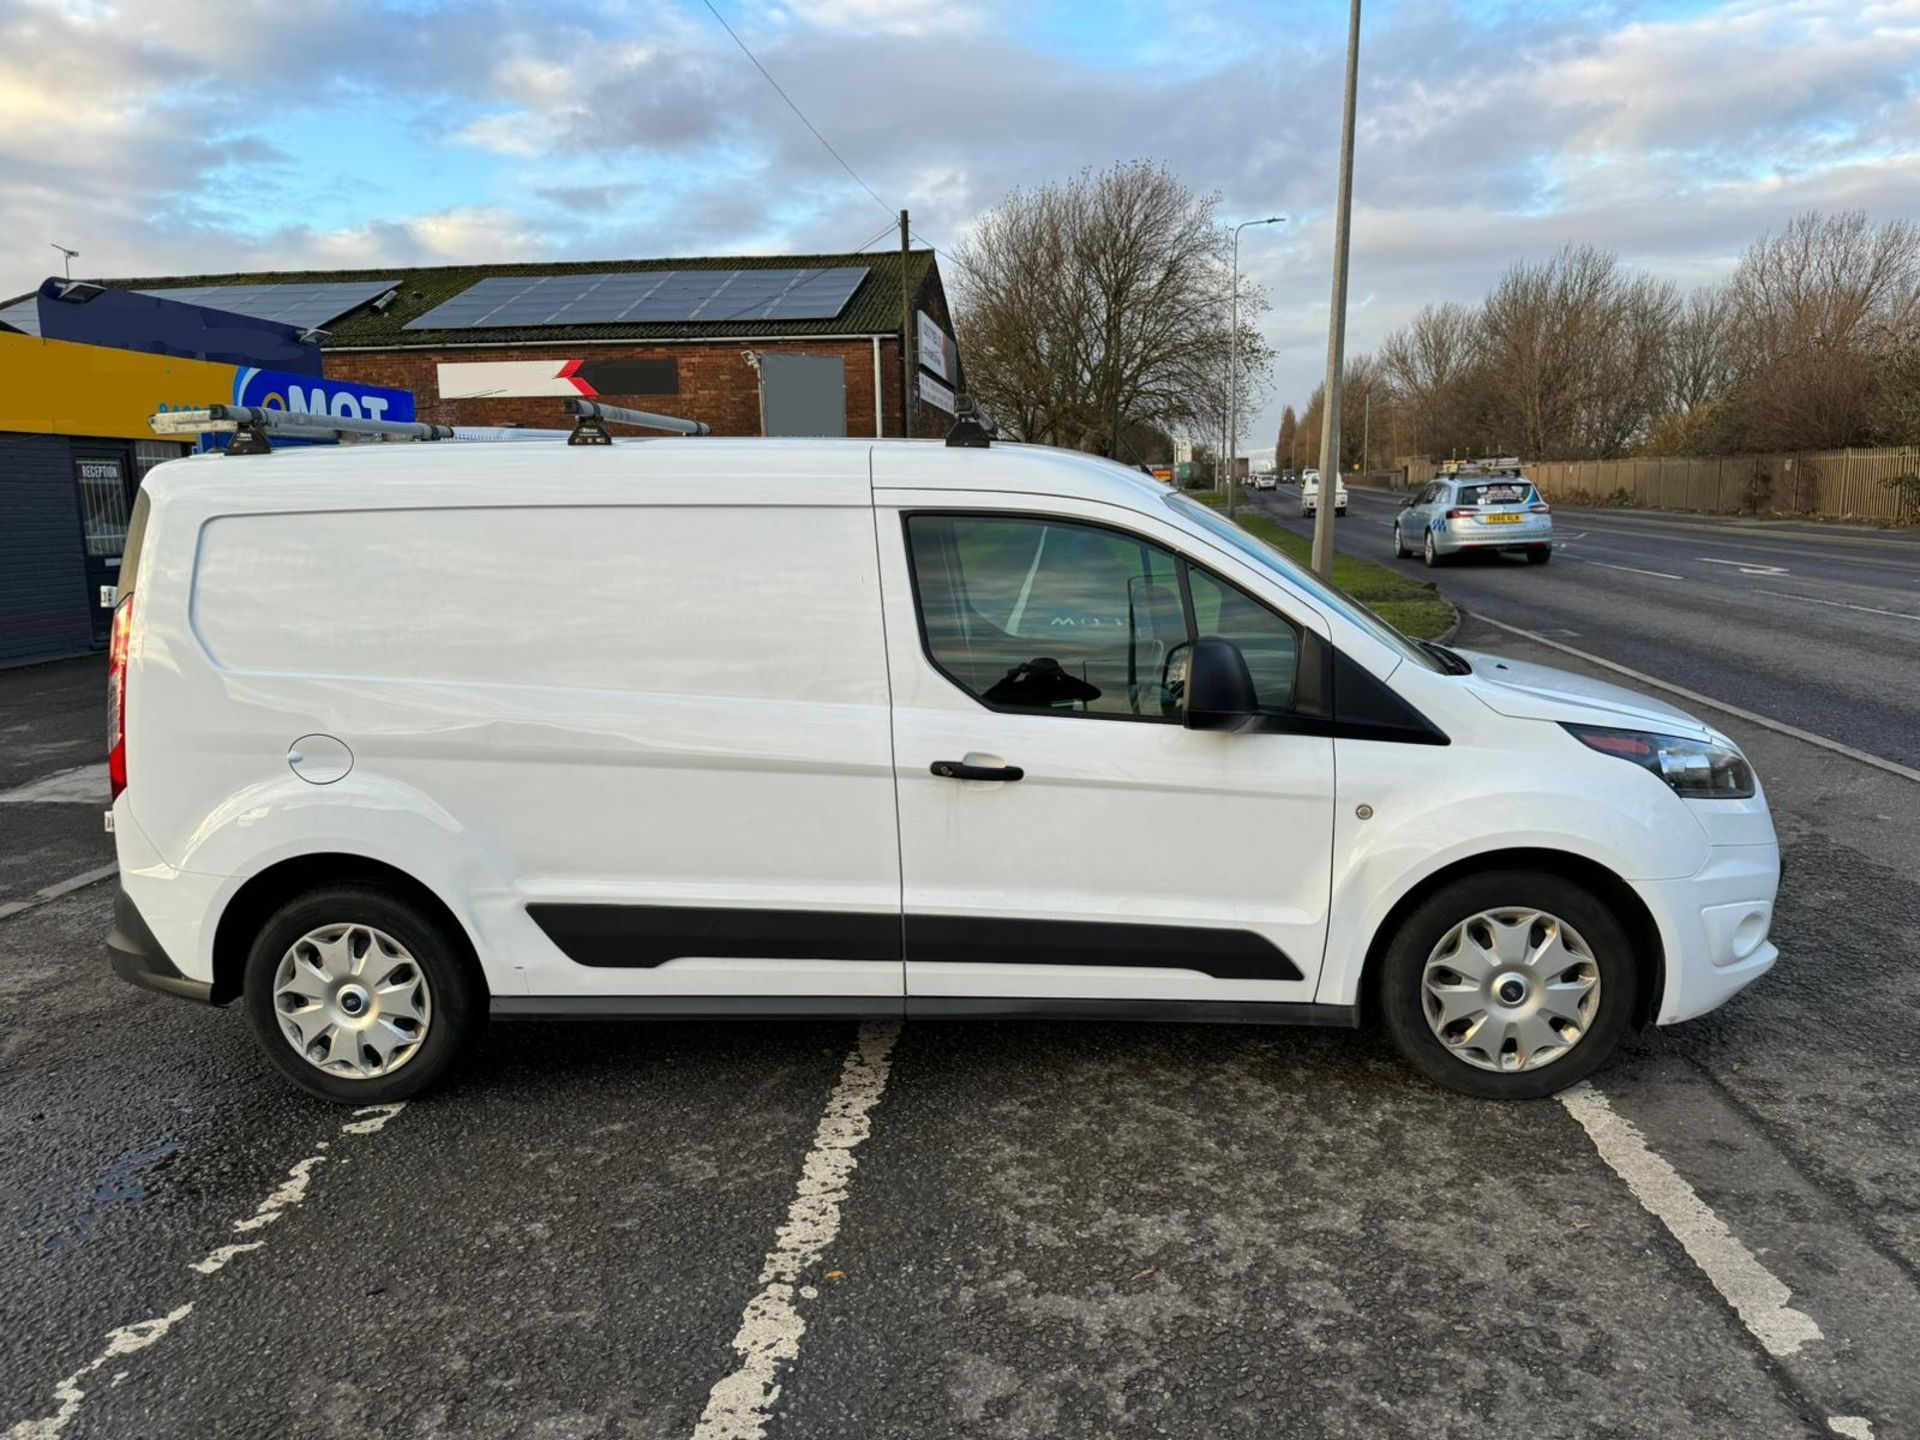 2018 18 FORD TRANSIT CONNECT TREND PAENL VAN - 128K MILES - EURO 6 - 3 SEATS - LWB - ROOF RACK. - Image 11 of 11